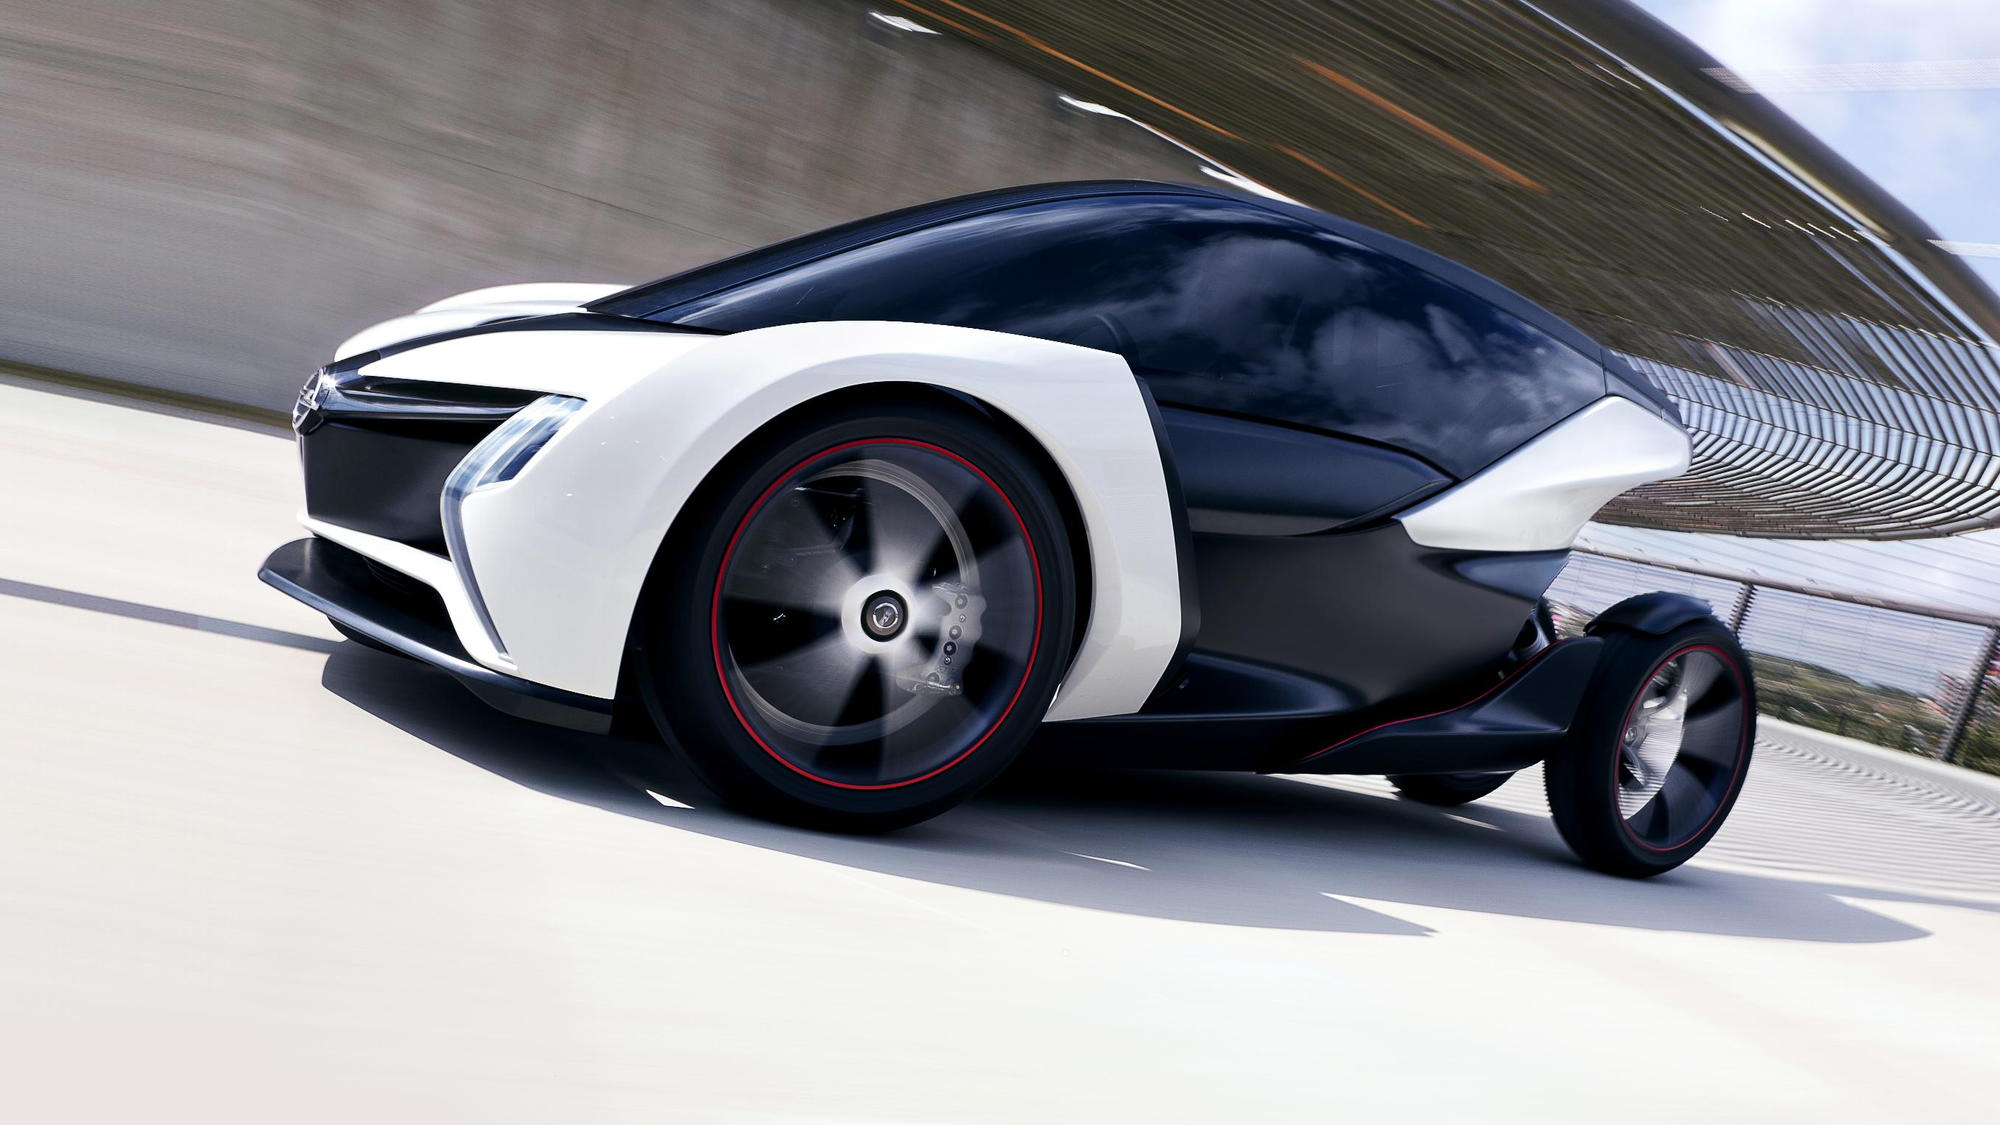 Vauxhall/Opel electric car concept for 2011 Frankfurt Auto Show